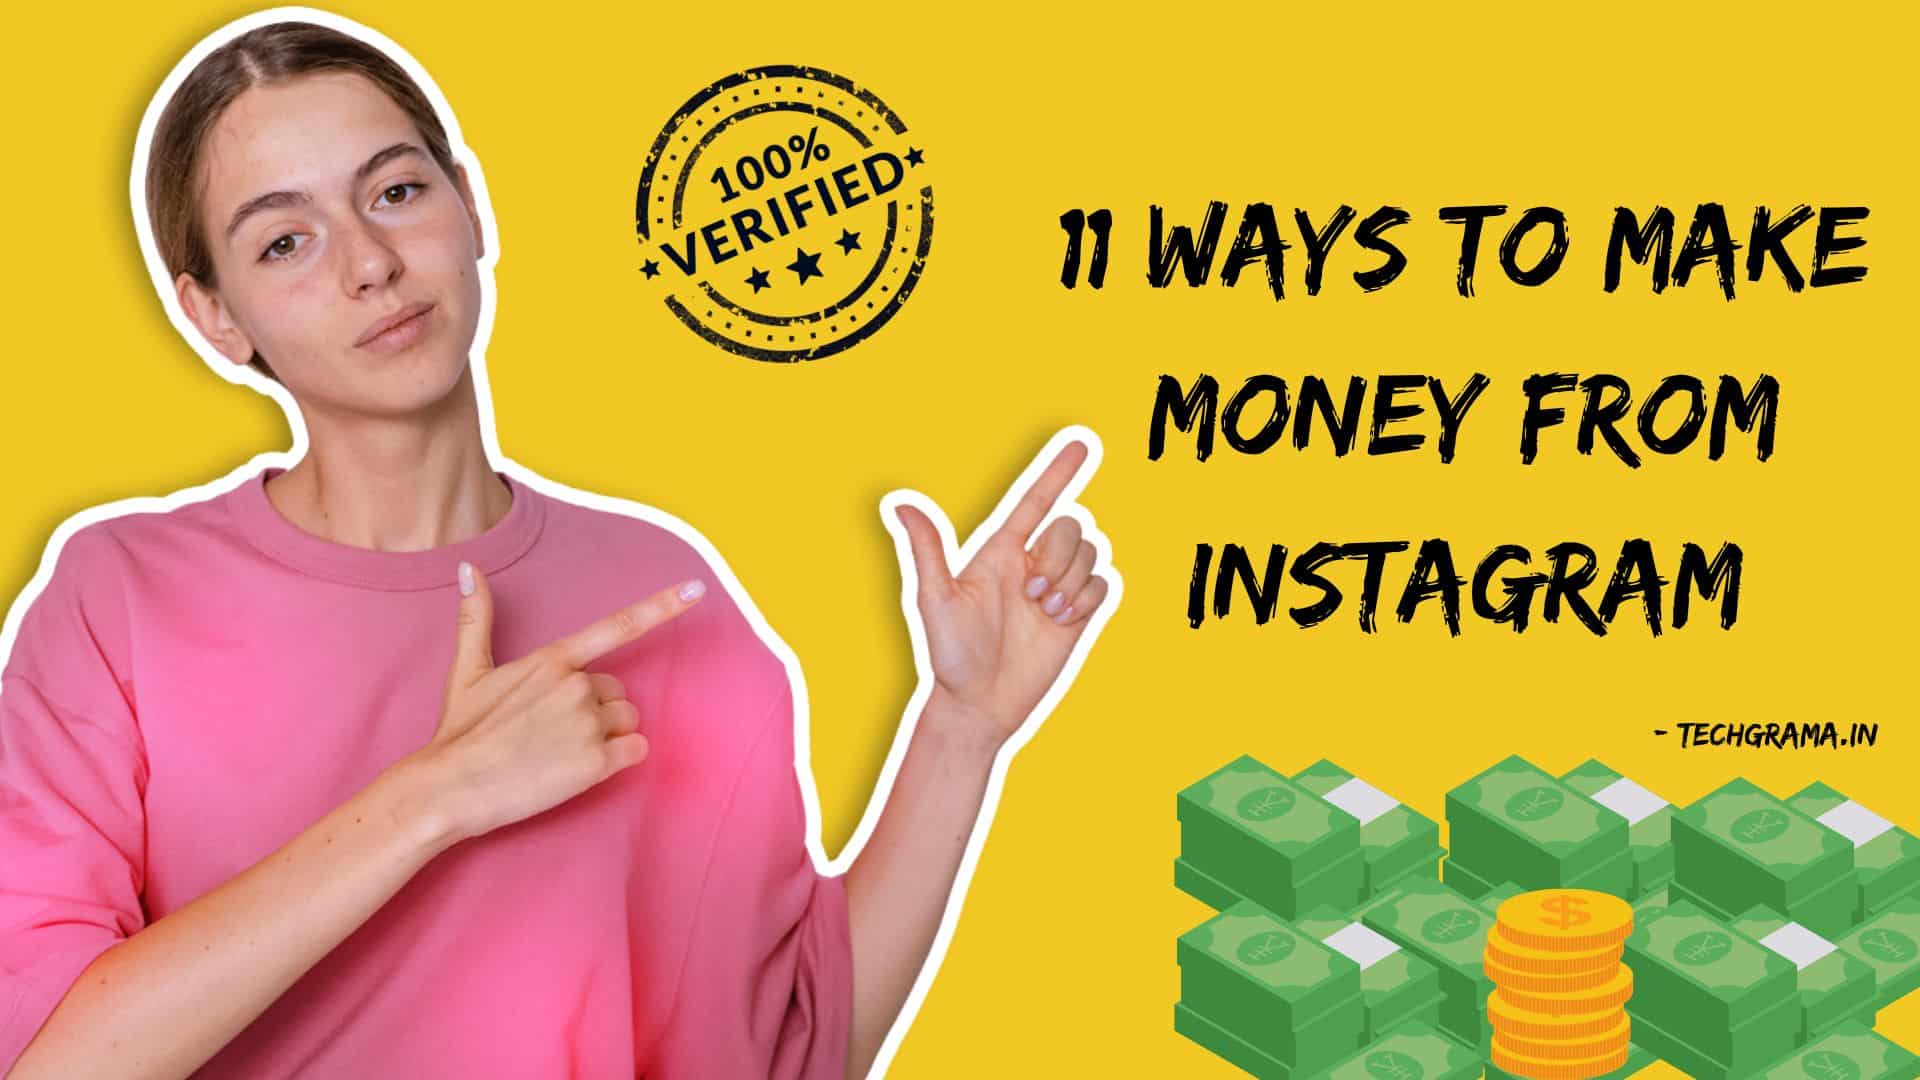 11 Ways to earn money from Instagram in India, How to earn money from Instagram in India, How to earn money, How to make money from Instagram